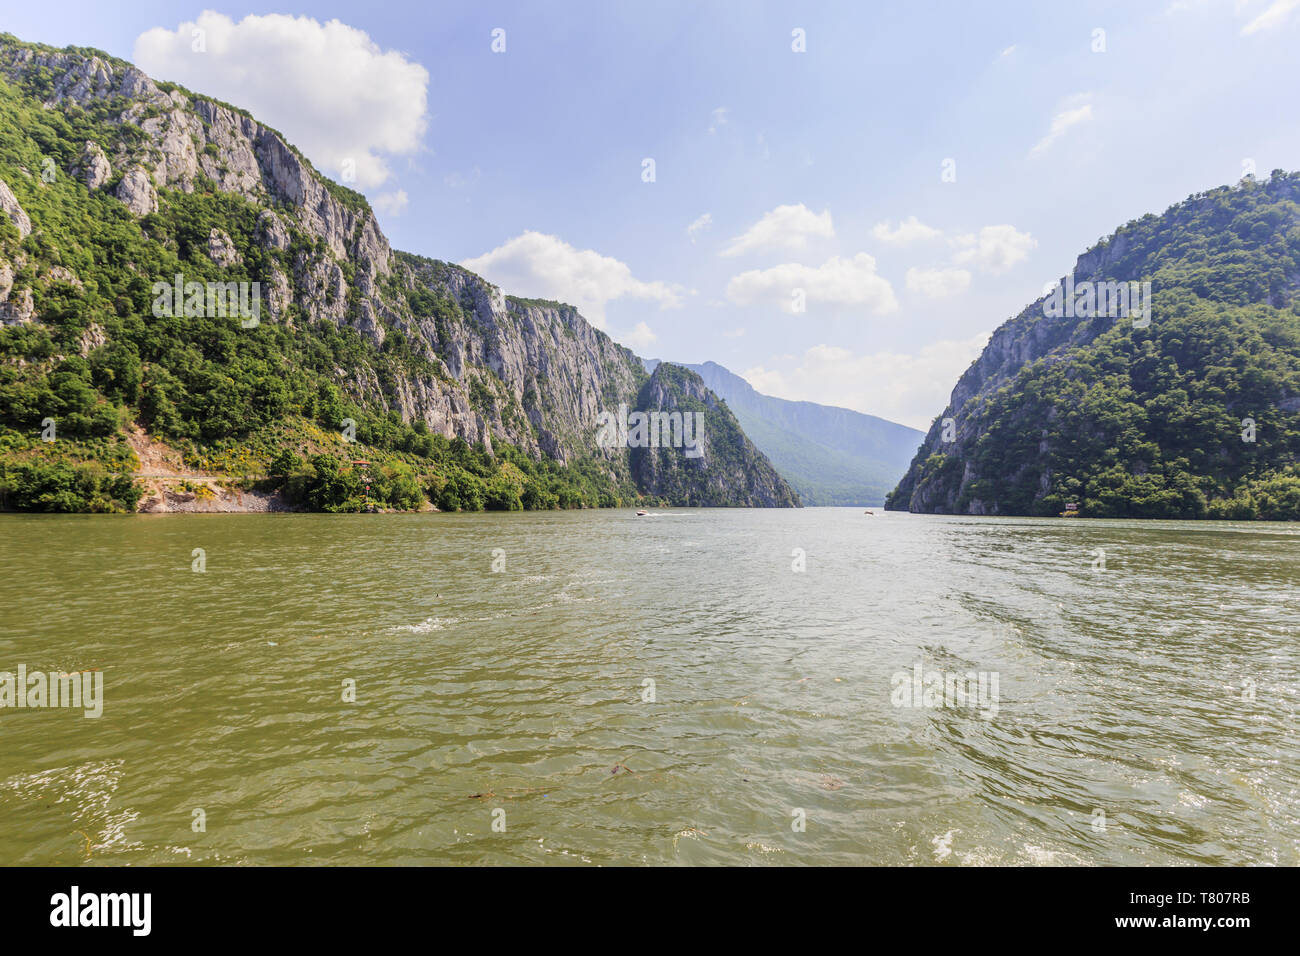 The Iron Gates Gorge On Danube River Nature Landscape ,Eastern Serbia , Border With Romania,  Europe, View From Cruise Ship Stock Photo